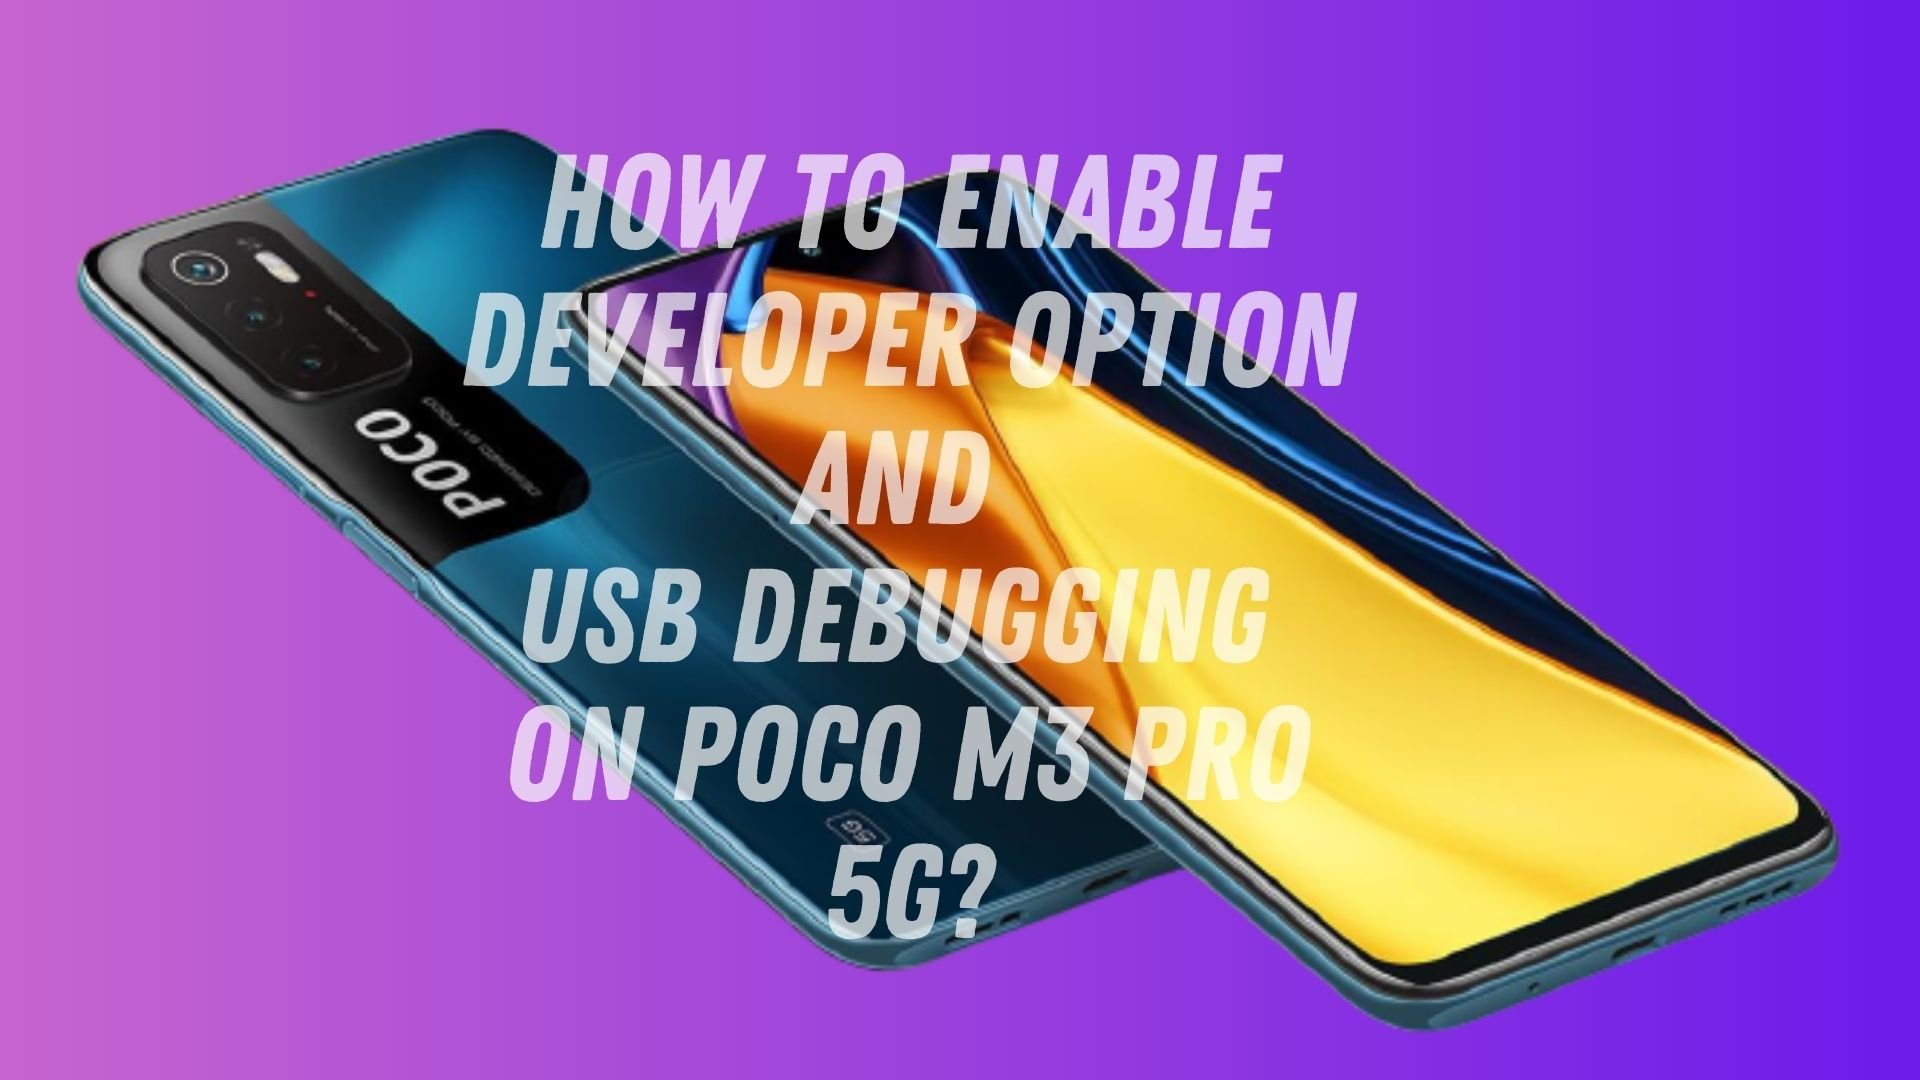 How To Enable Developer Option and USB Debugging on POCO M3 Pro 5G?